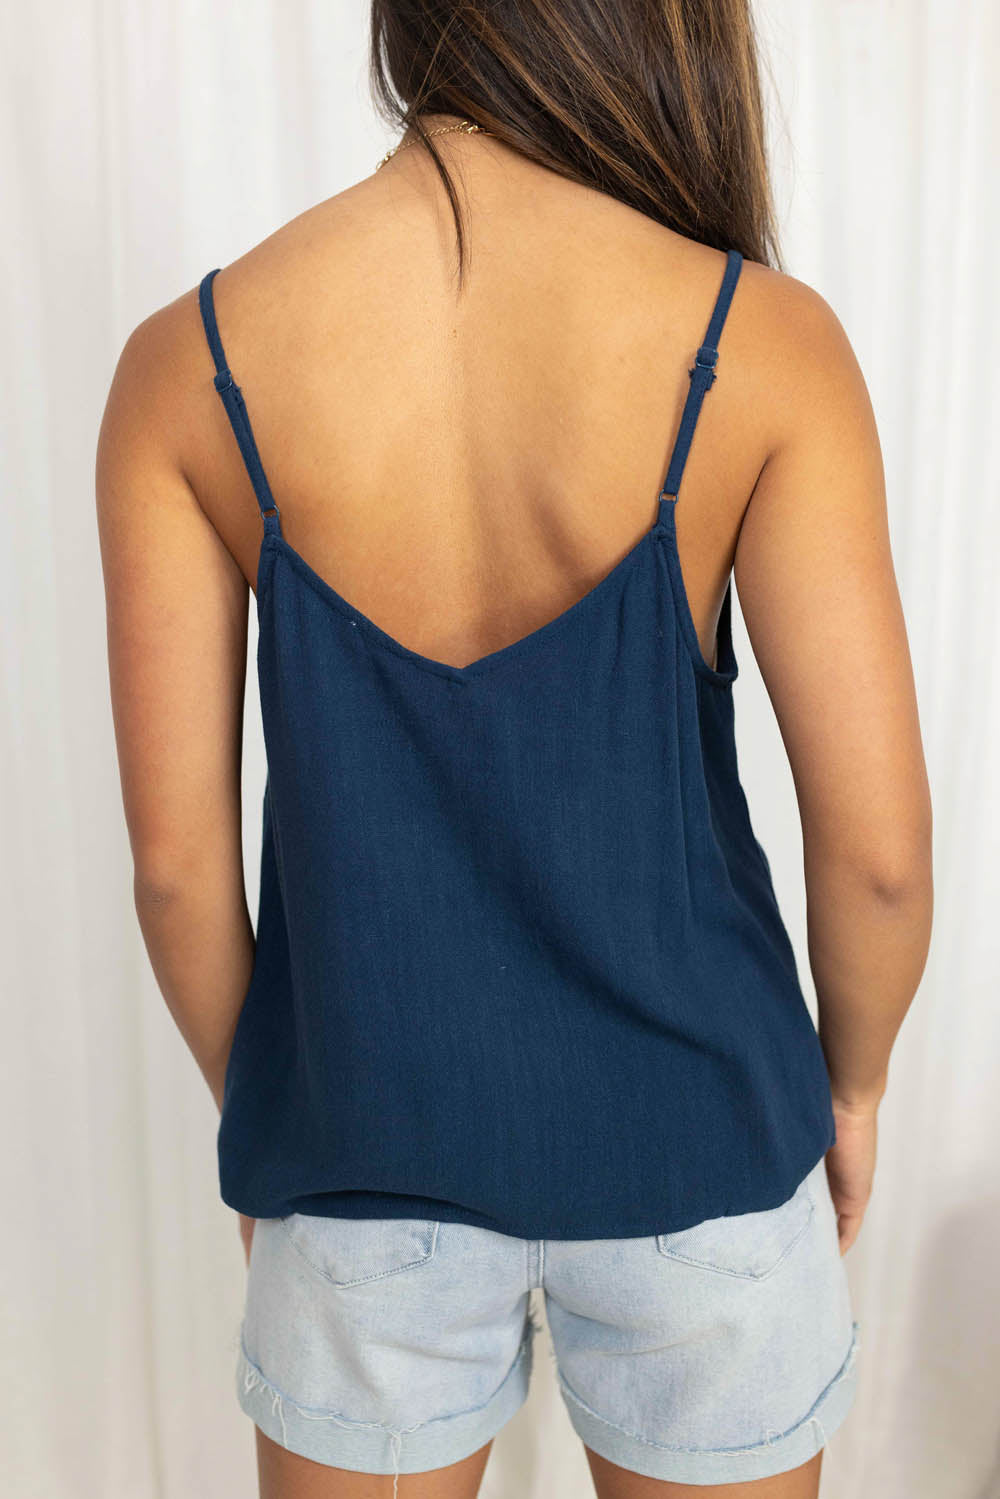 The Long Cami French Blue